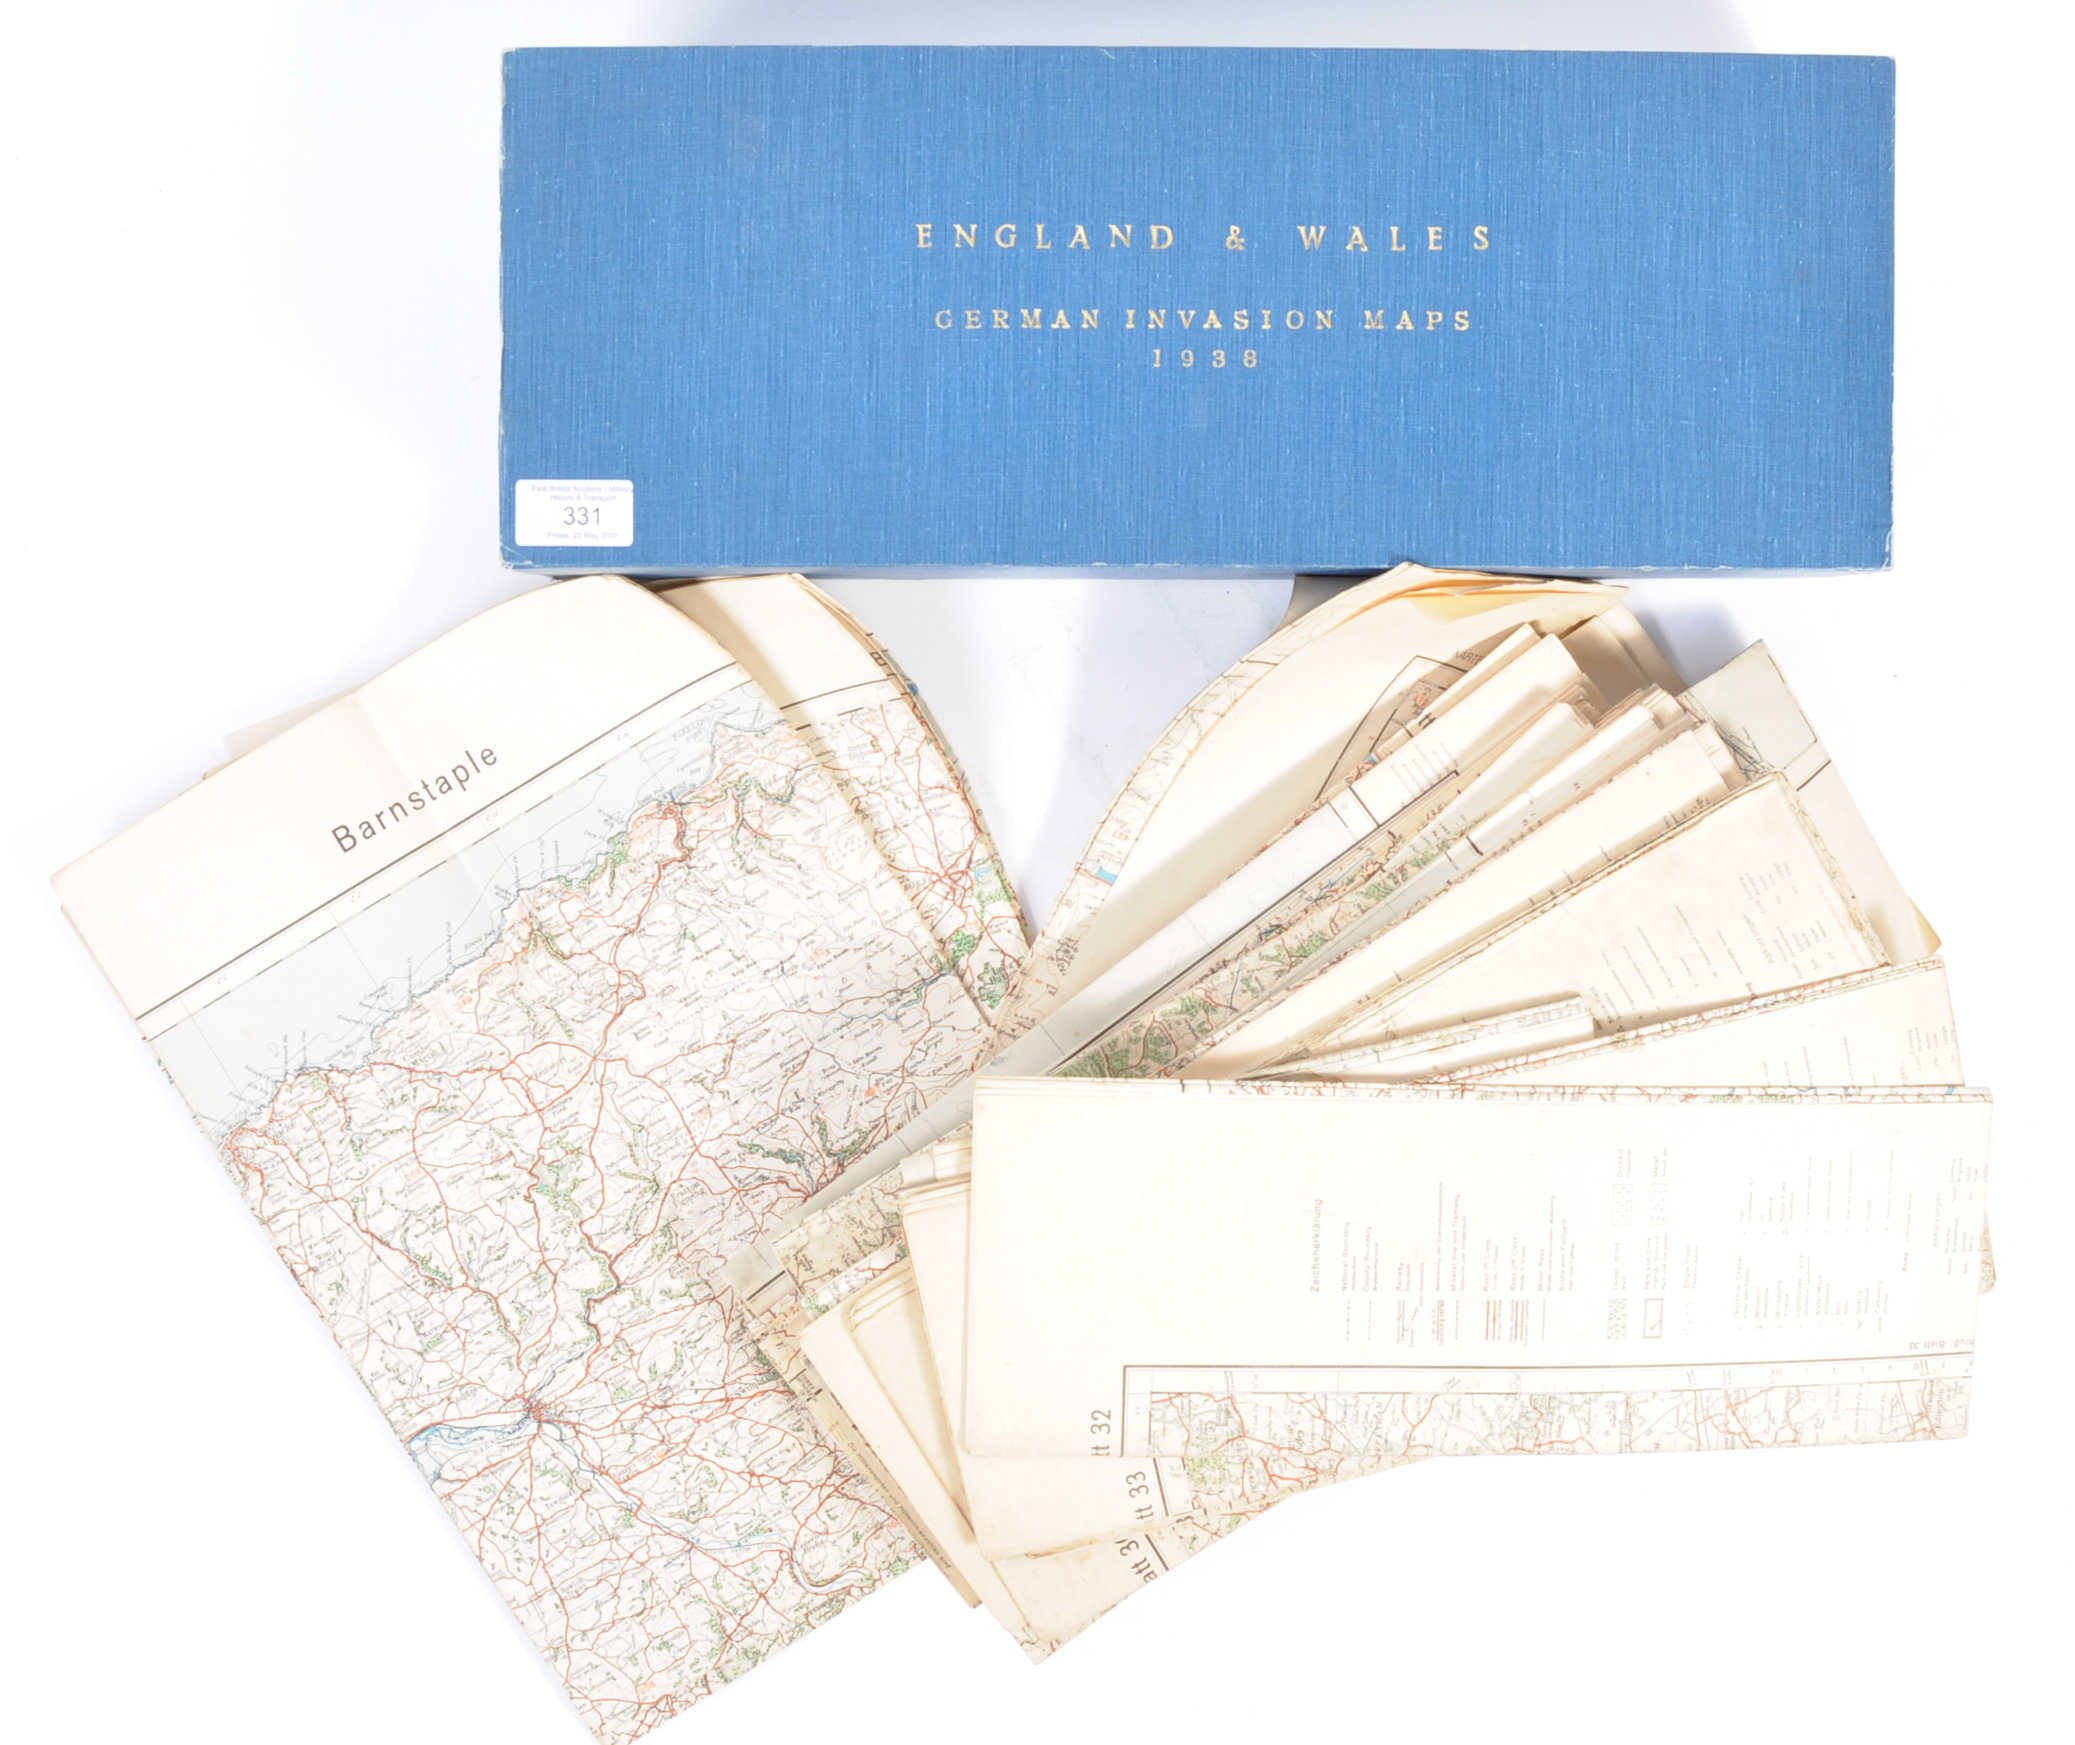 RARE WWII COMPLETE SET OF GERMAN INVASION MAPS OF WALES & ENGLAND